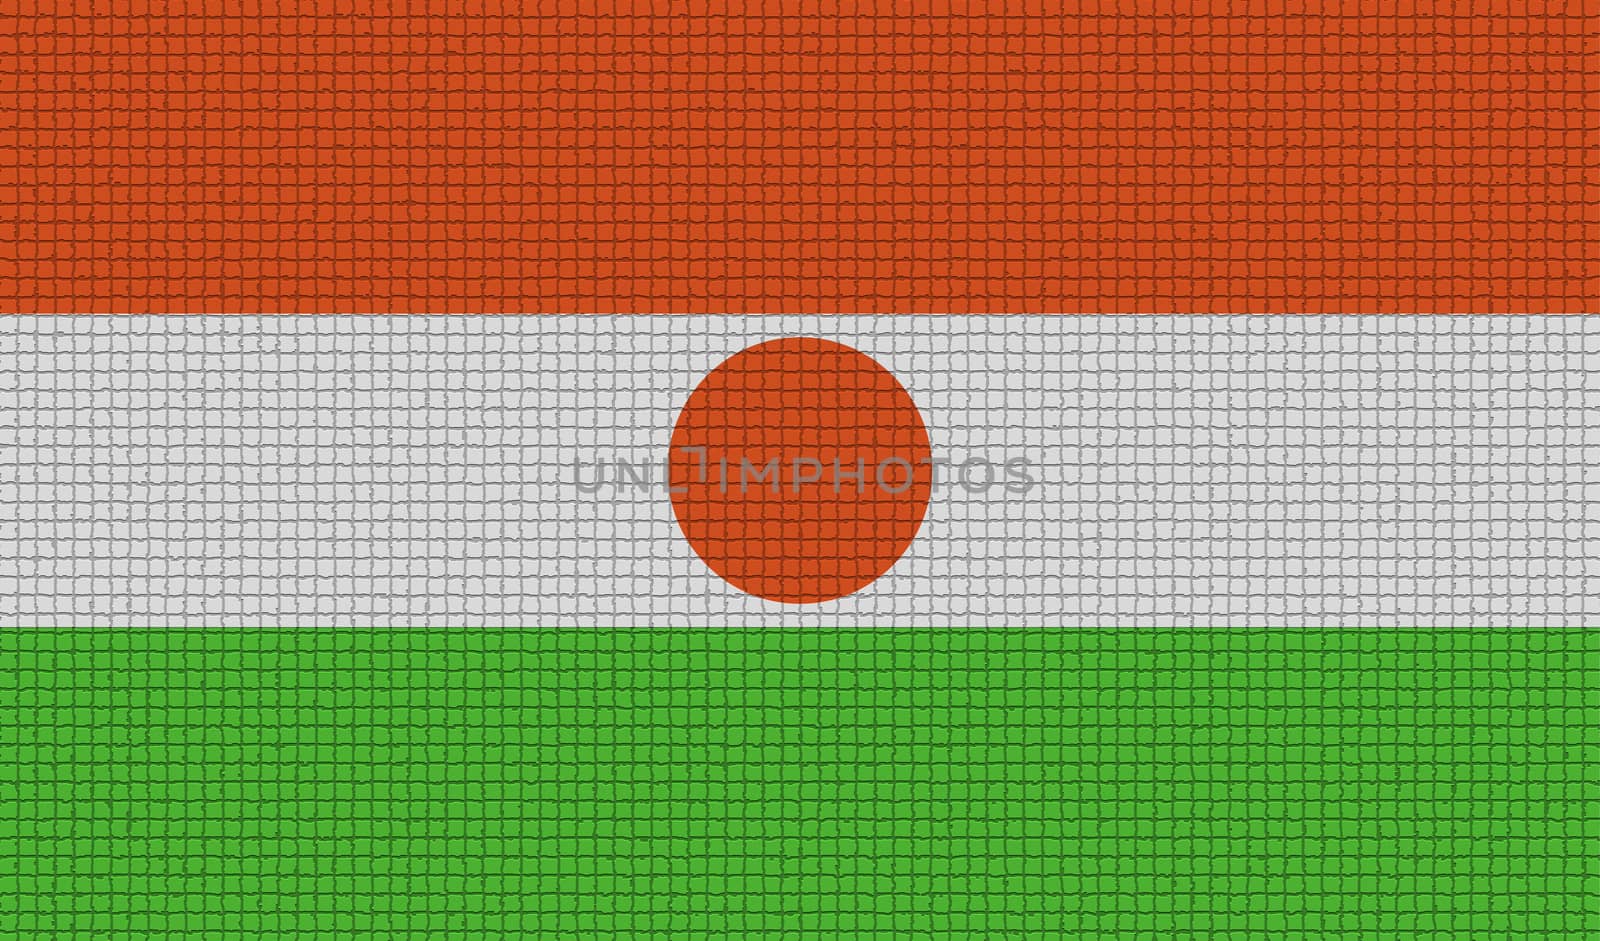 Flags of Niger with abstract textures. Rasterized version